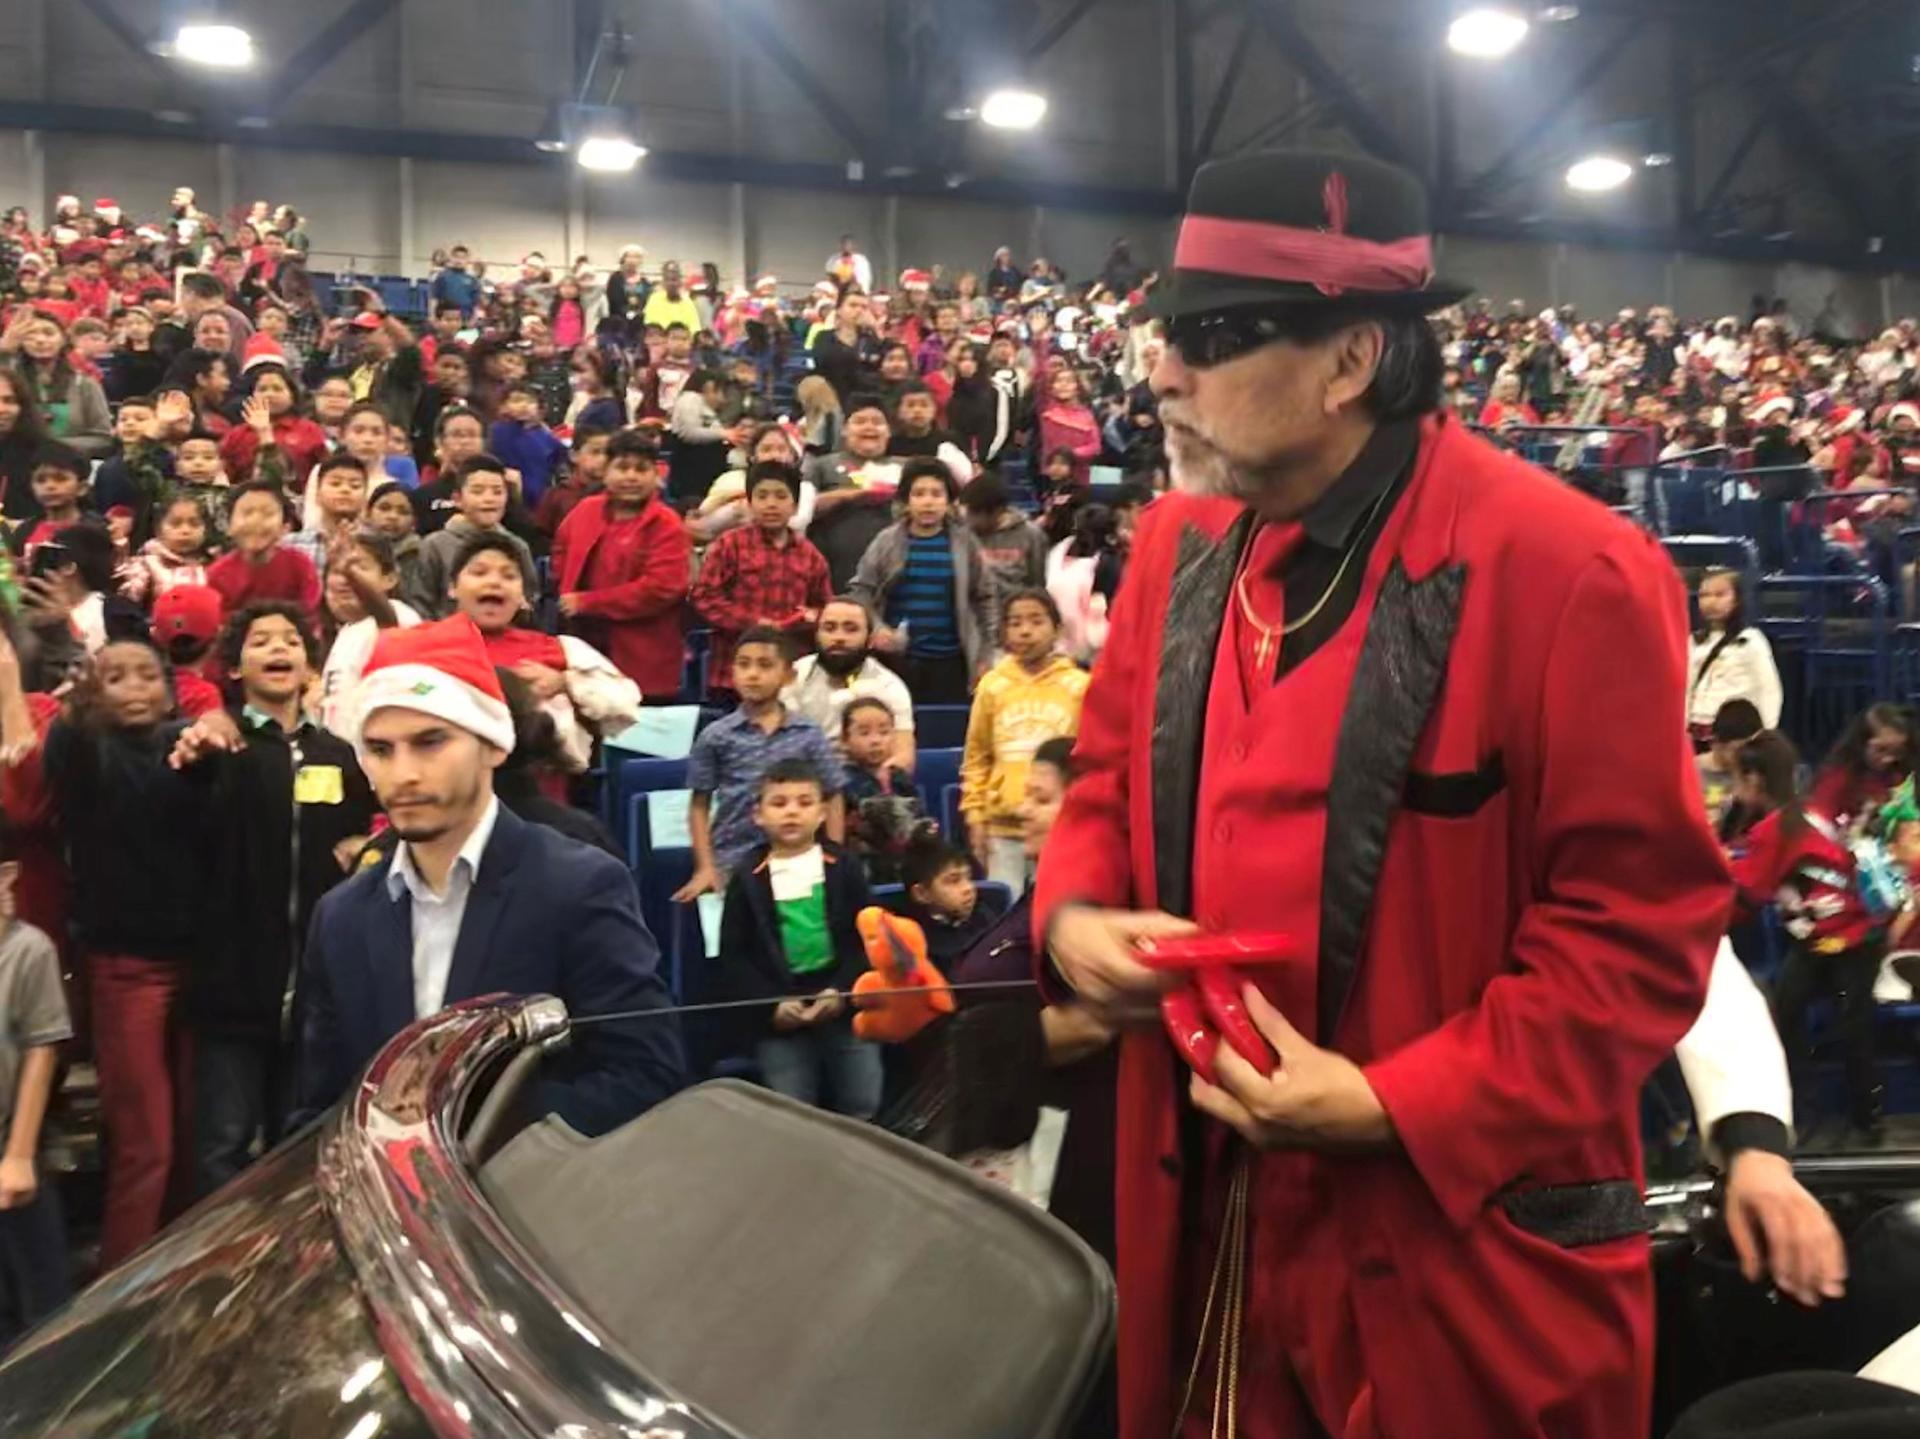 Pancho Claus is shown in a red jacket and black hat standing in a car with a large crowd behind him.